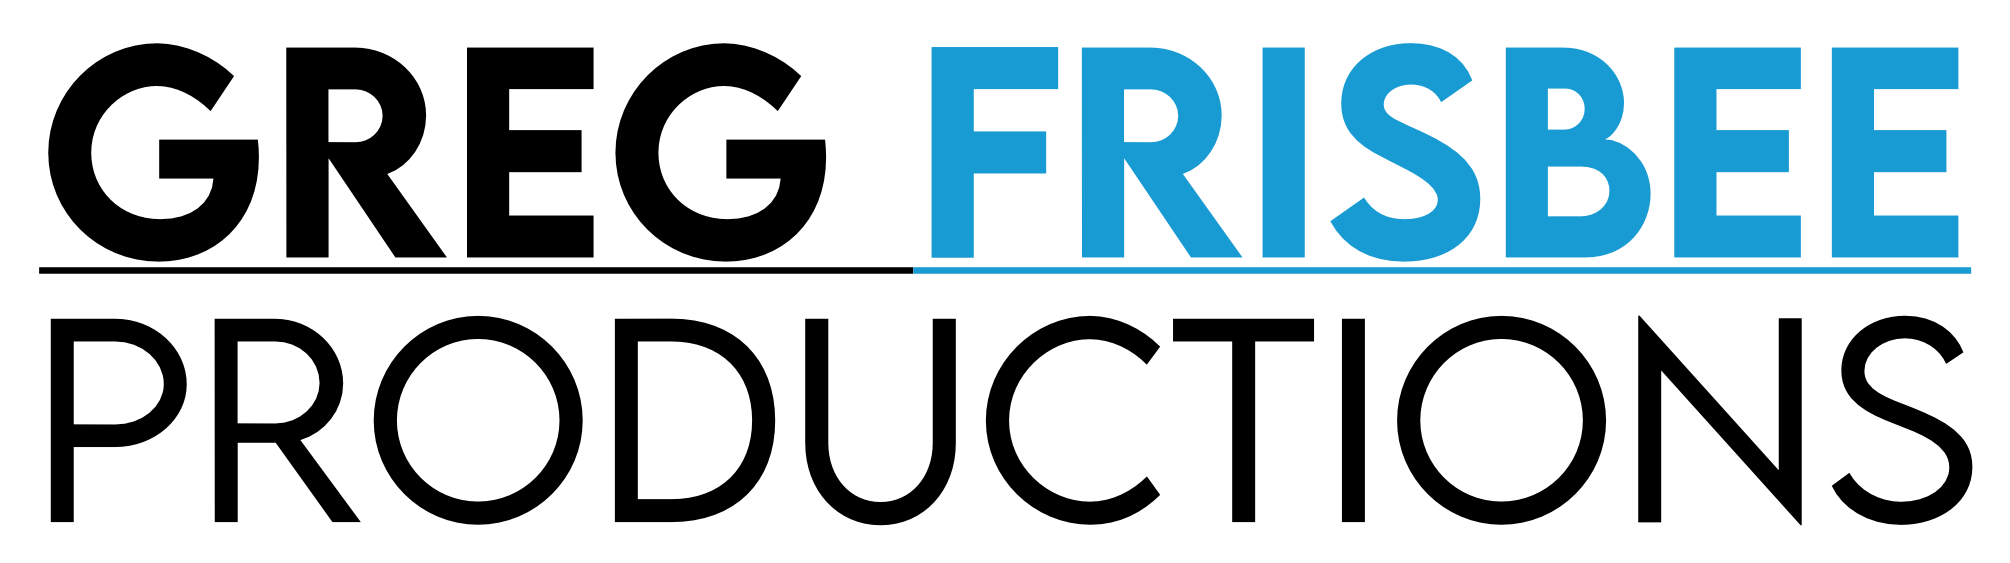 Greg Frisbee Productions